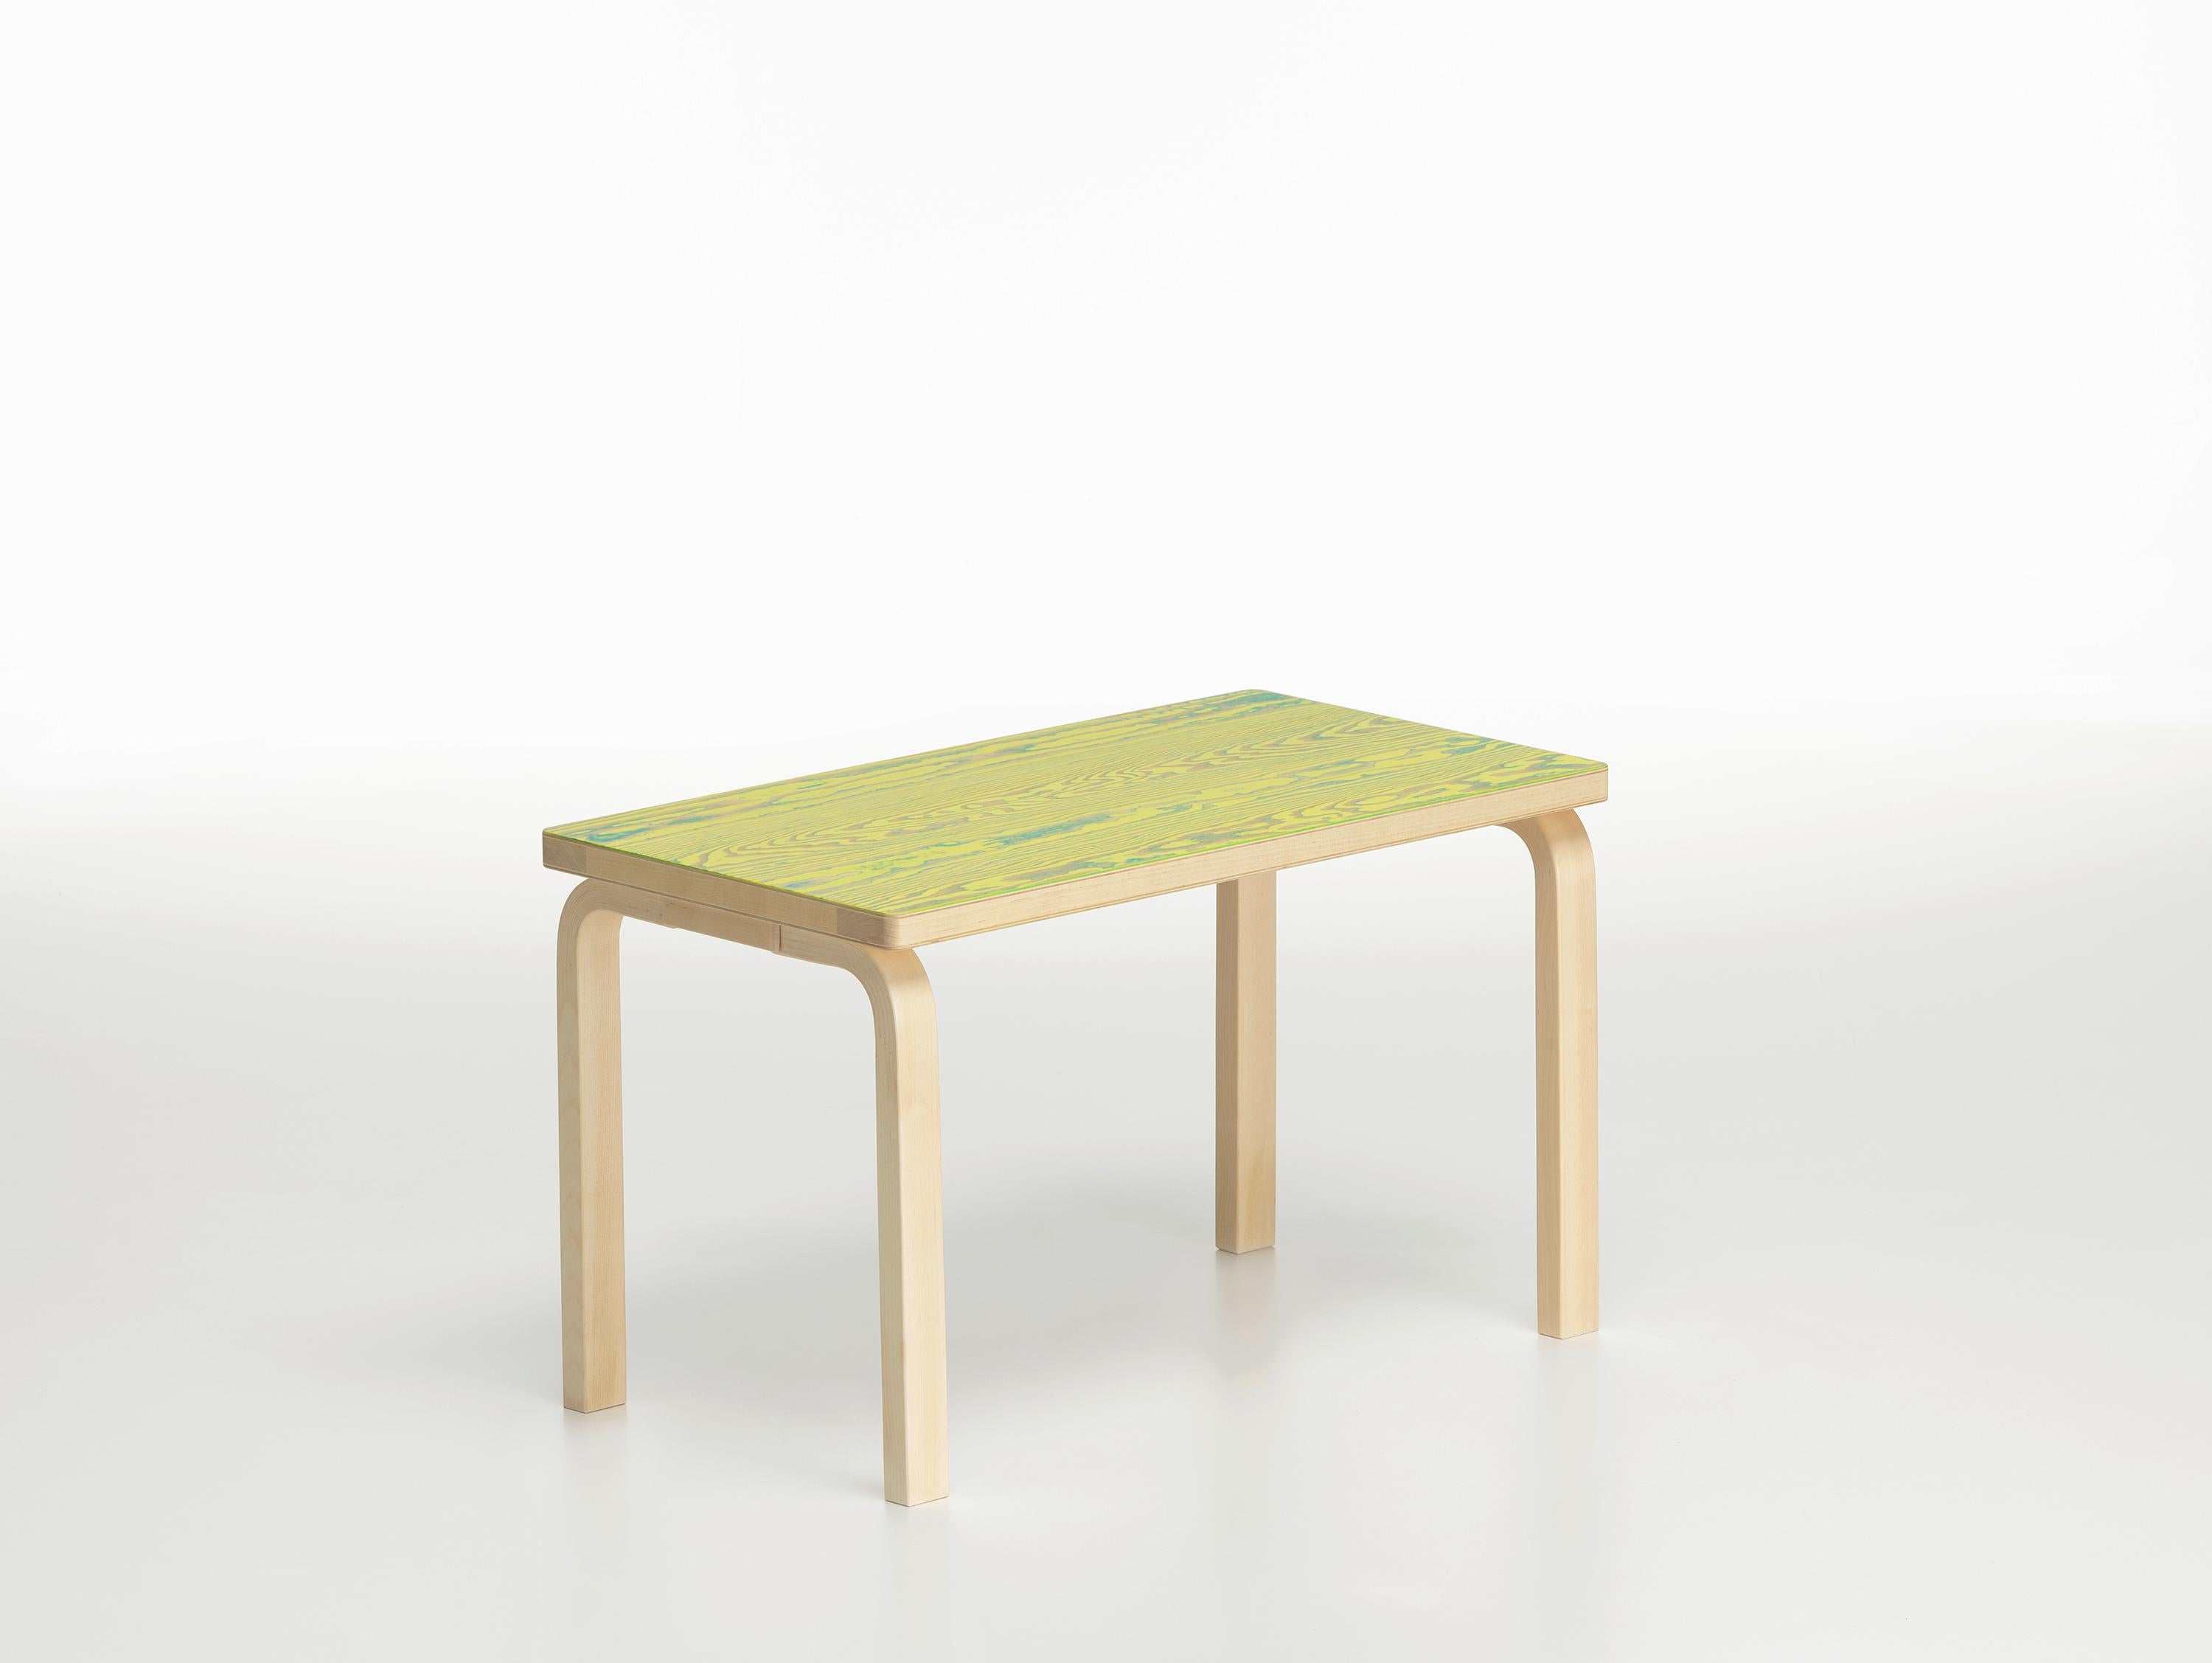 Modern Artek Bench 153B Coloring in Green and Yellow by Alvar Aalto and Jo Nagasaka For Sale